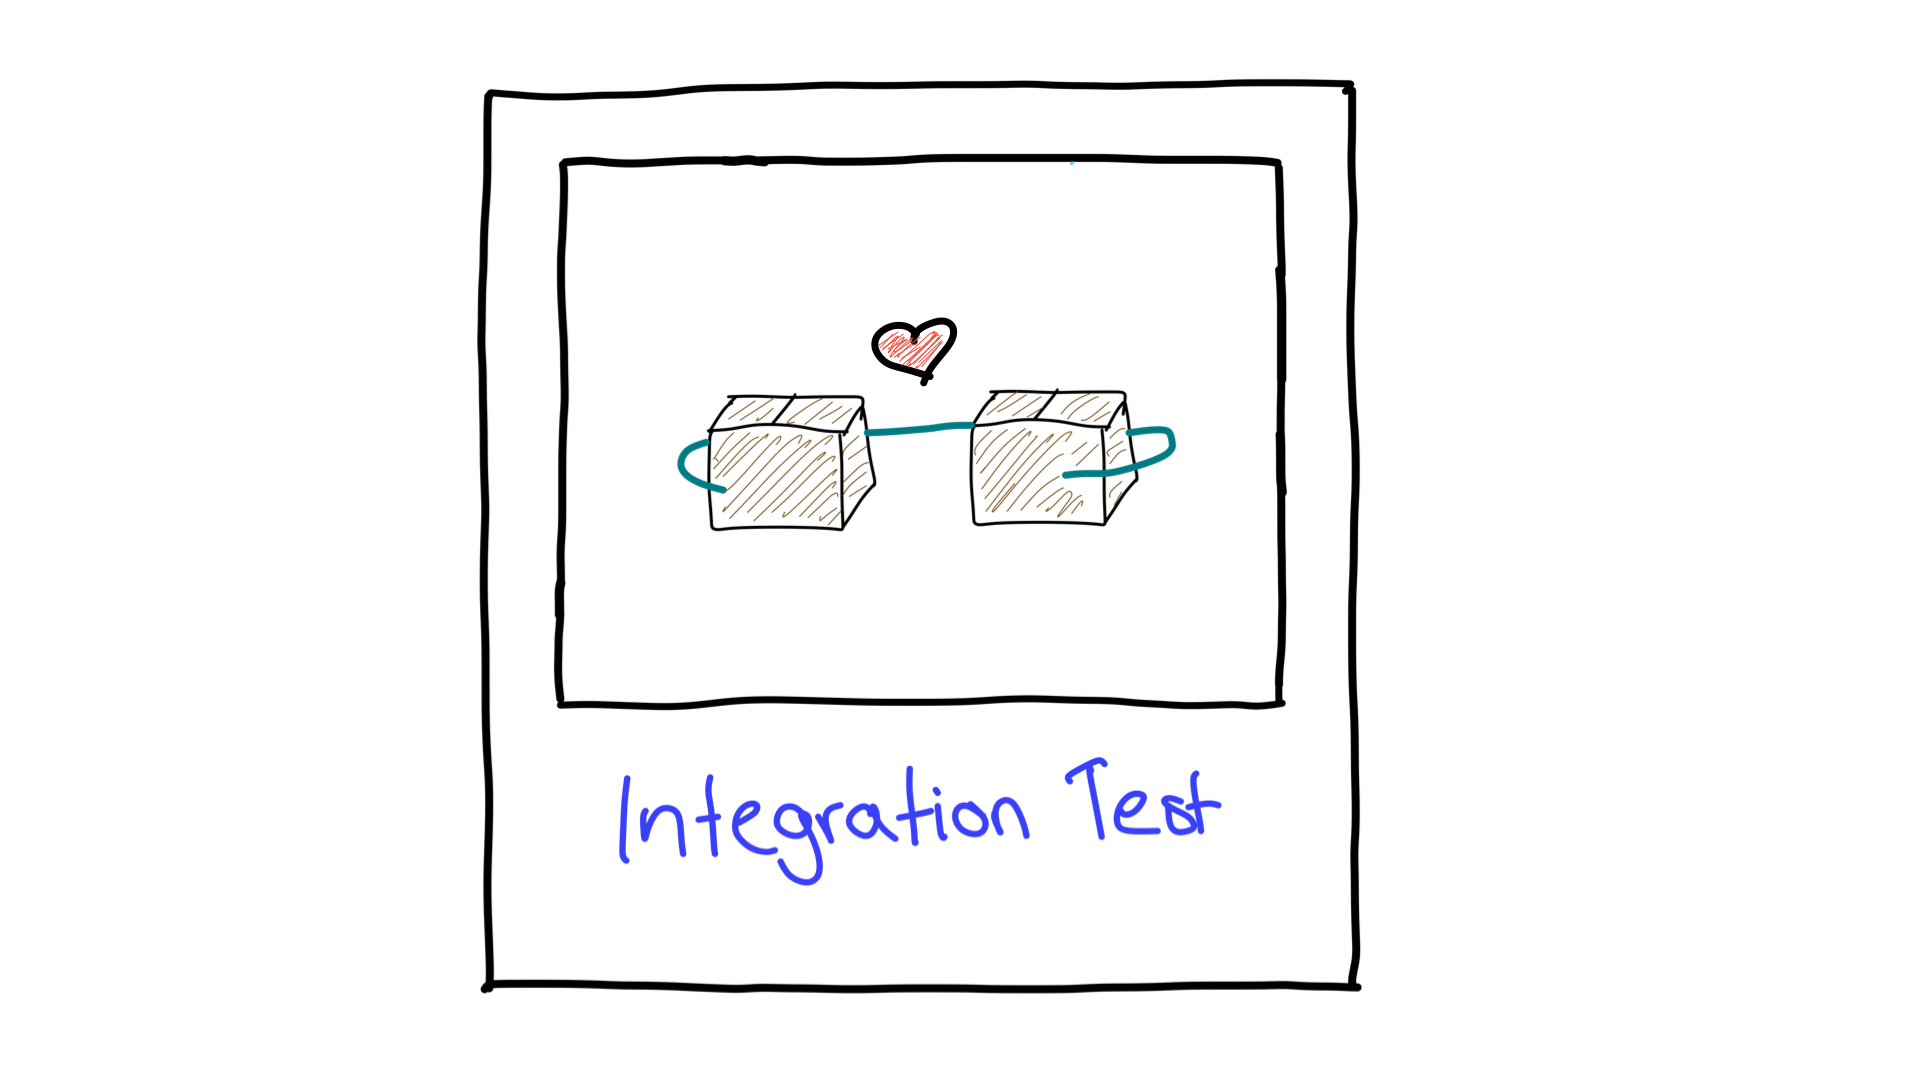 A simplified depiction of integration testing showing how two unit working together.